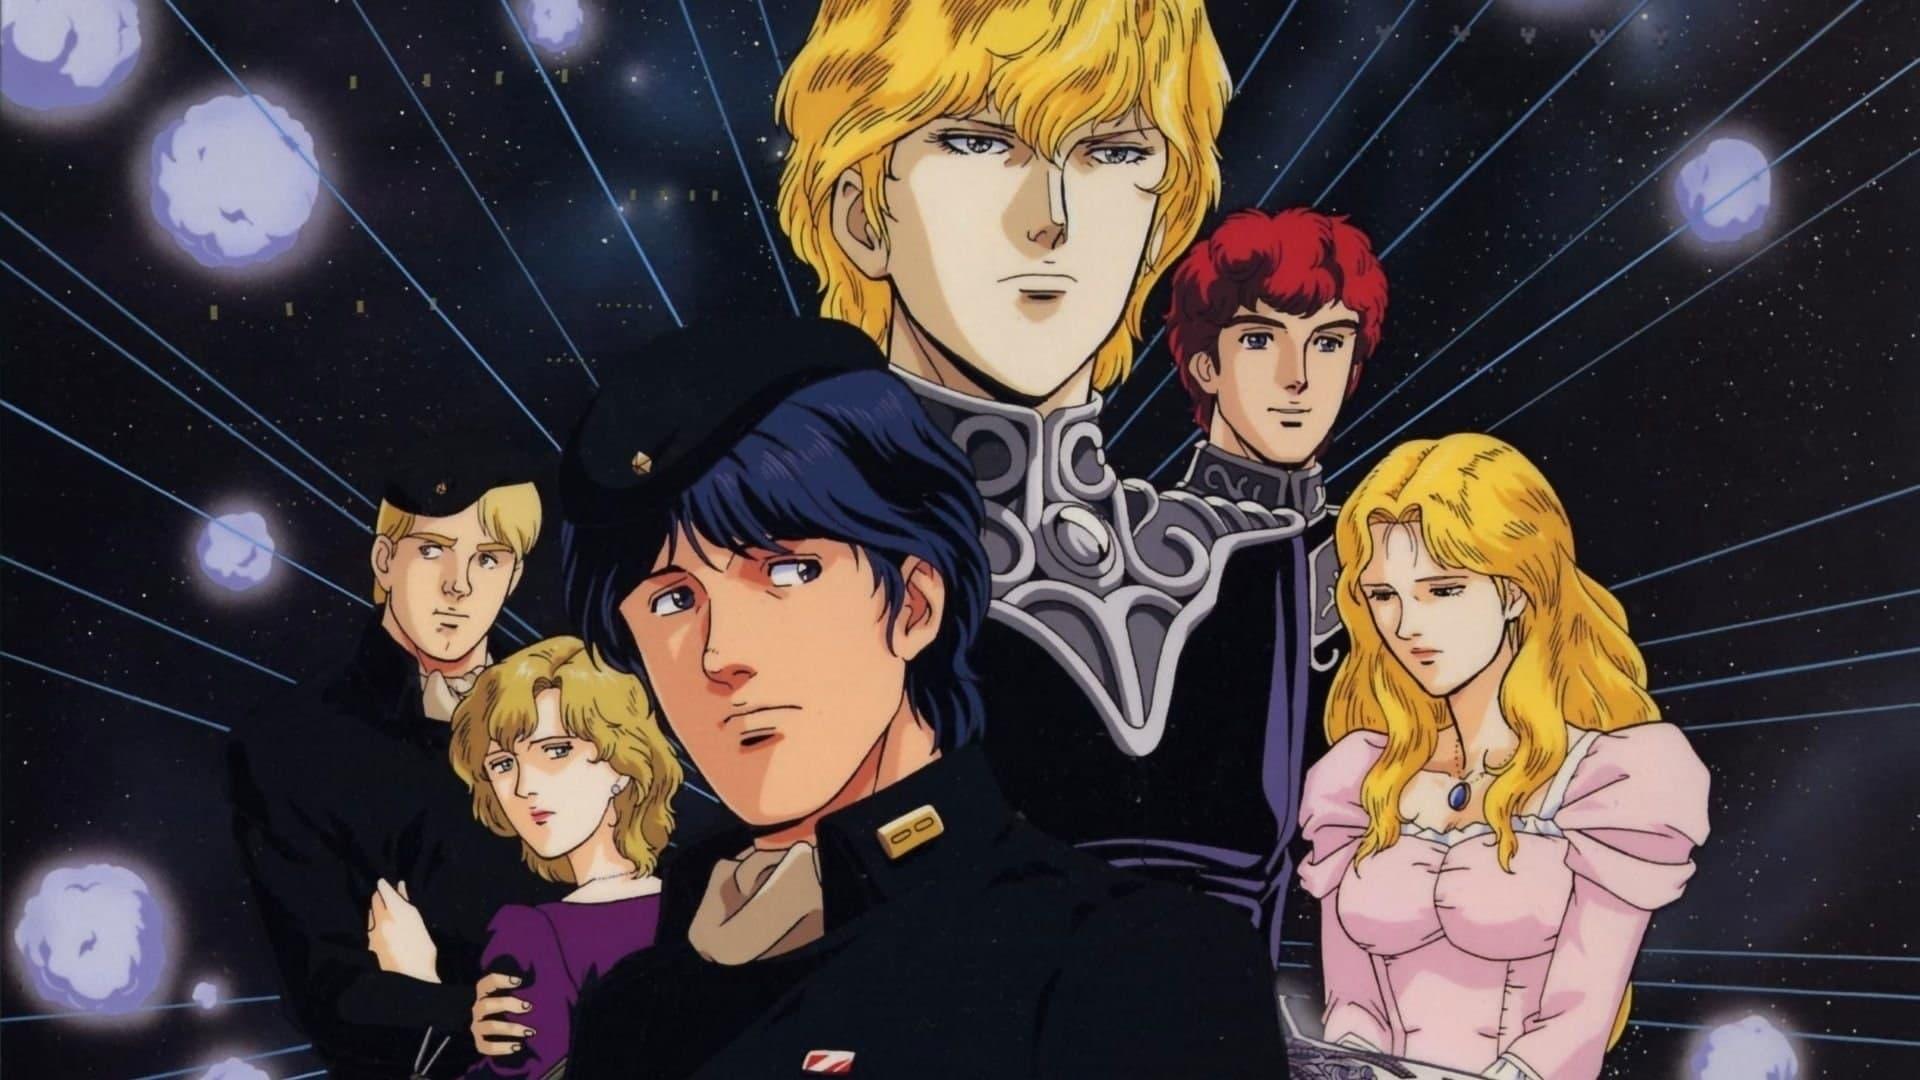 Legend of the Galactic Heroes backdrop